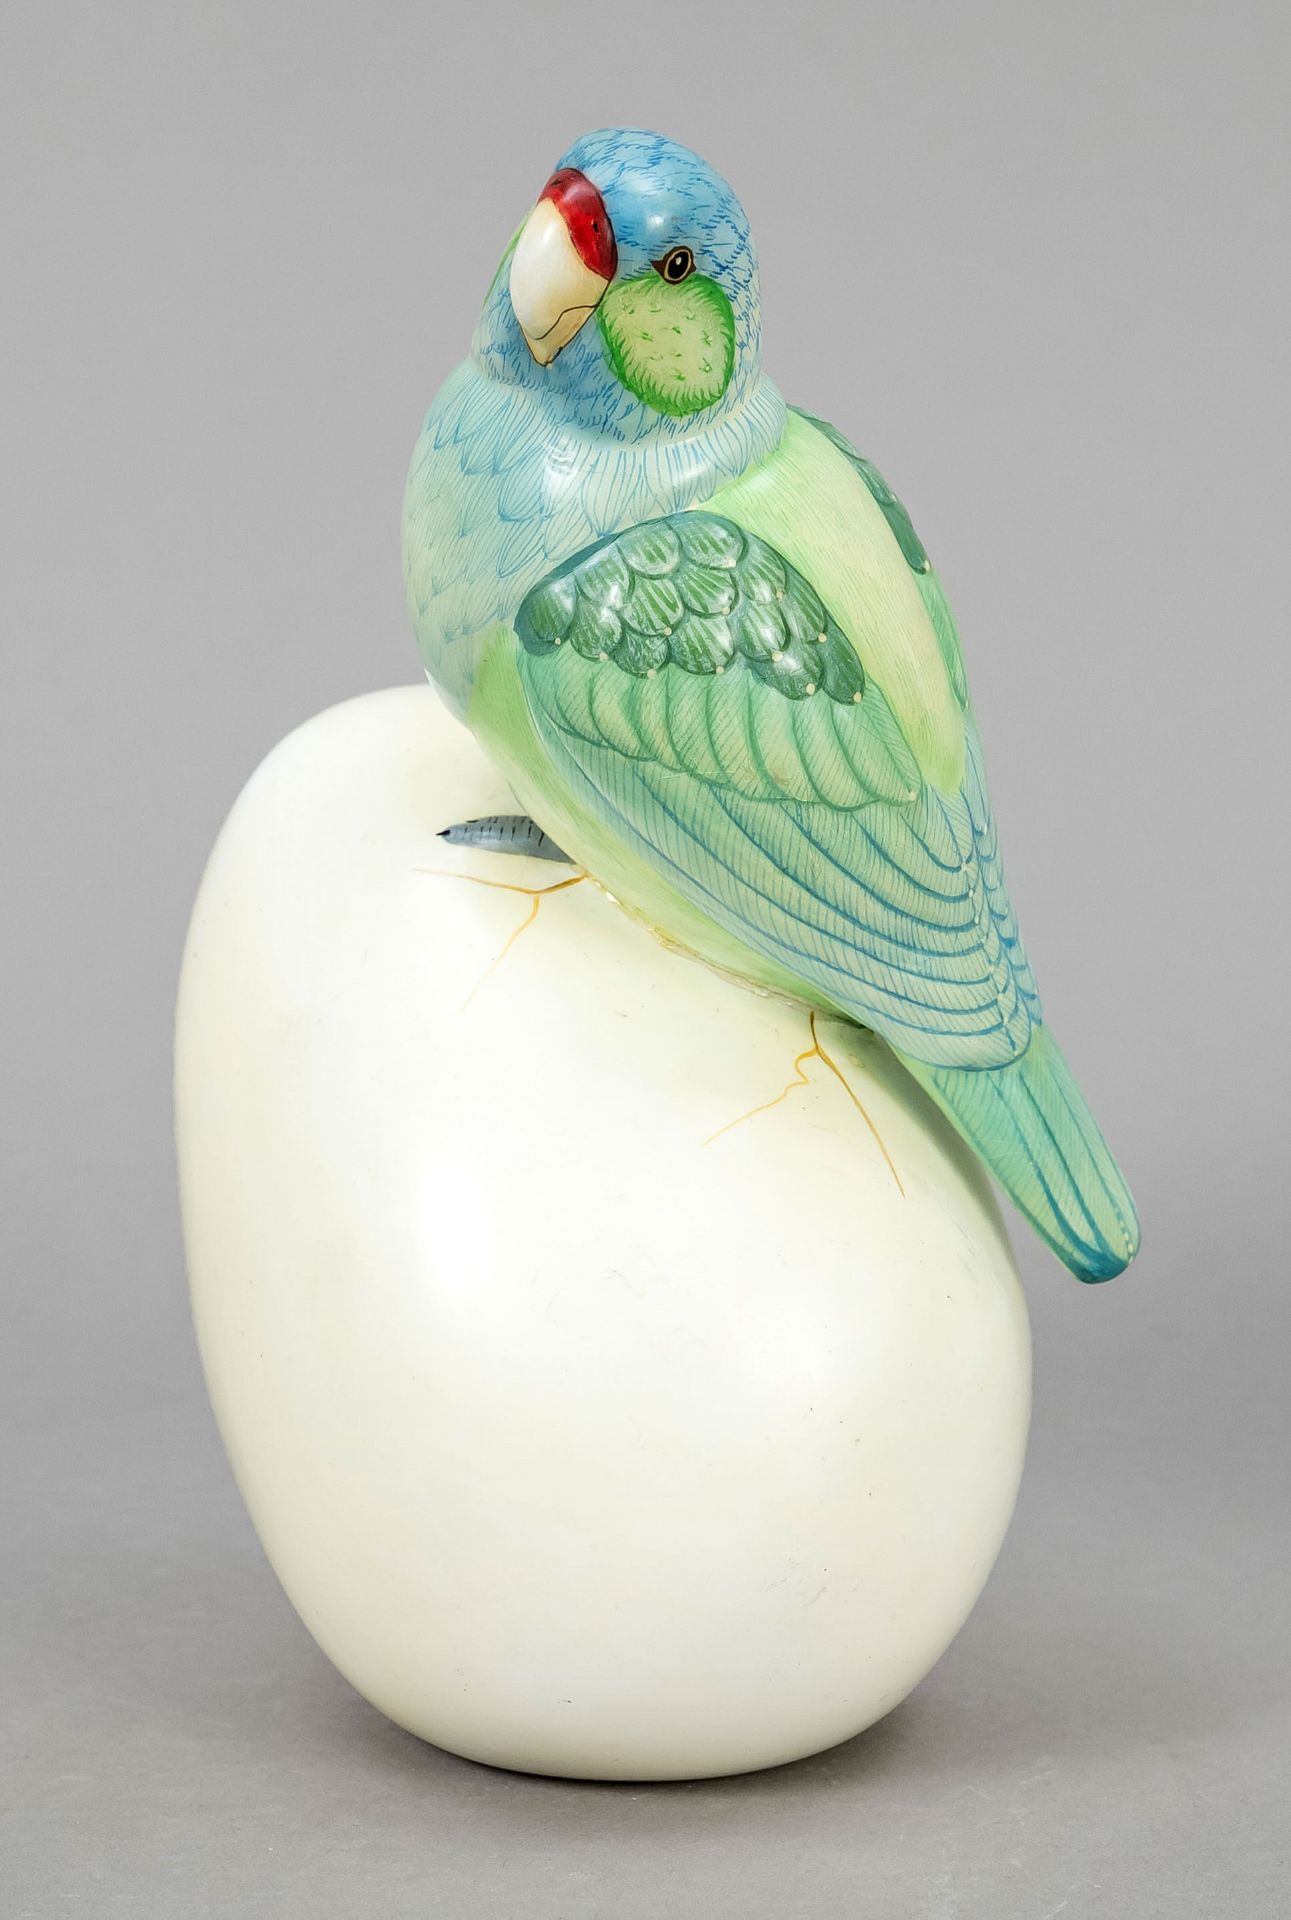 Sergio Bustamante, born in 1949 Culiacan/Mexico, ceramic project, parrot on an egg, polychrome